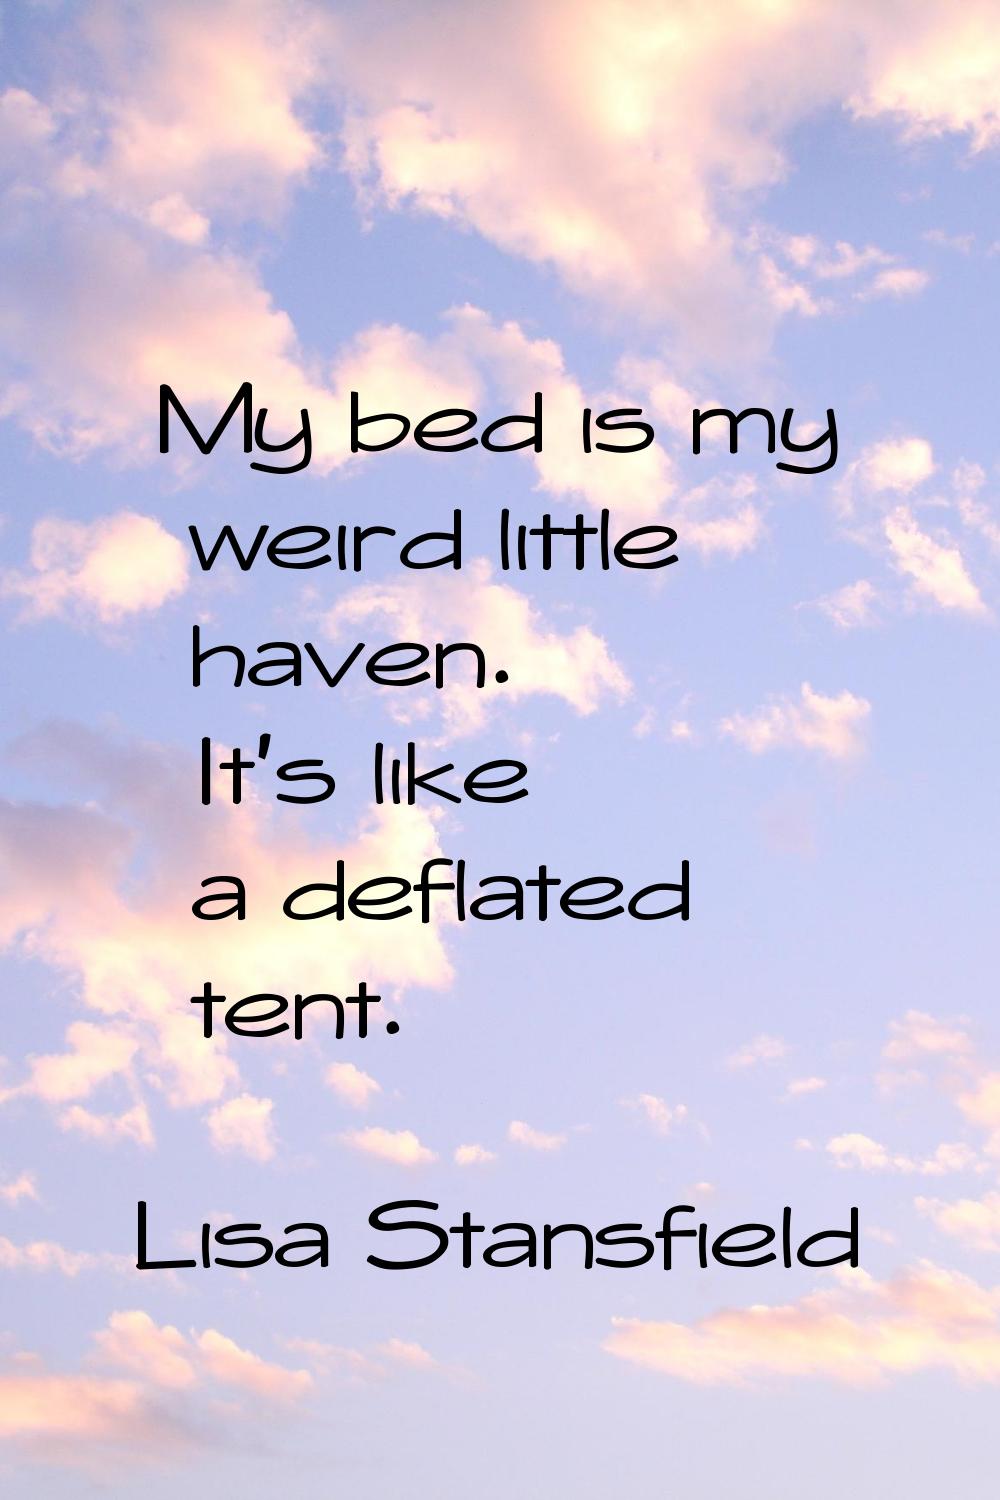 My bed is my weird little haven. It's like a deflated tent.